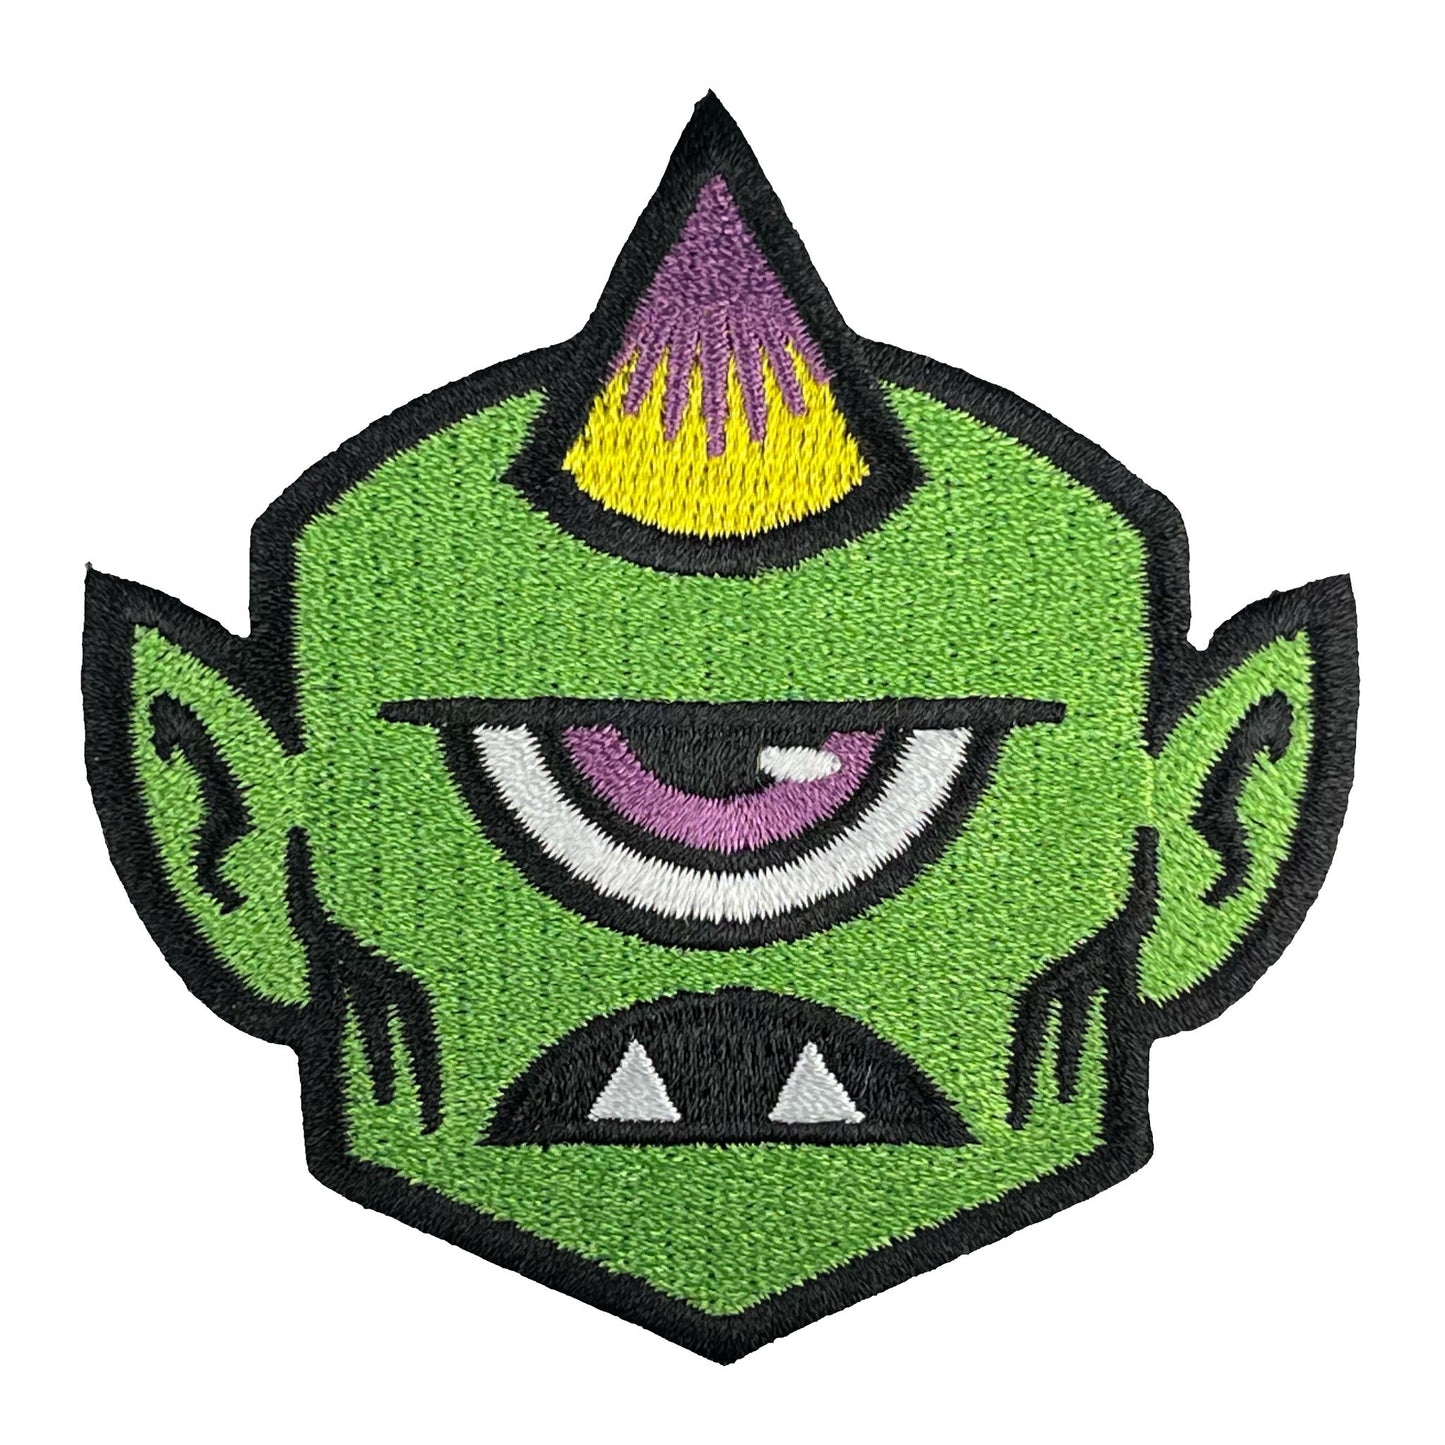 Monsterologist Cyclops embroidered patch